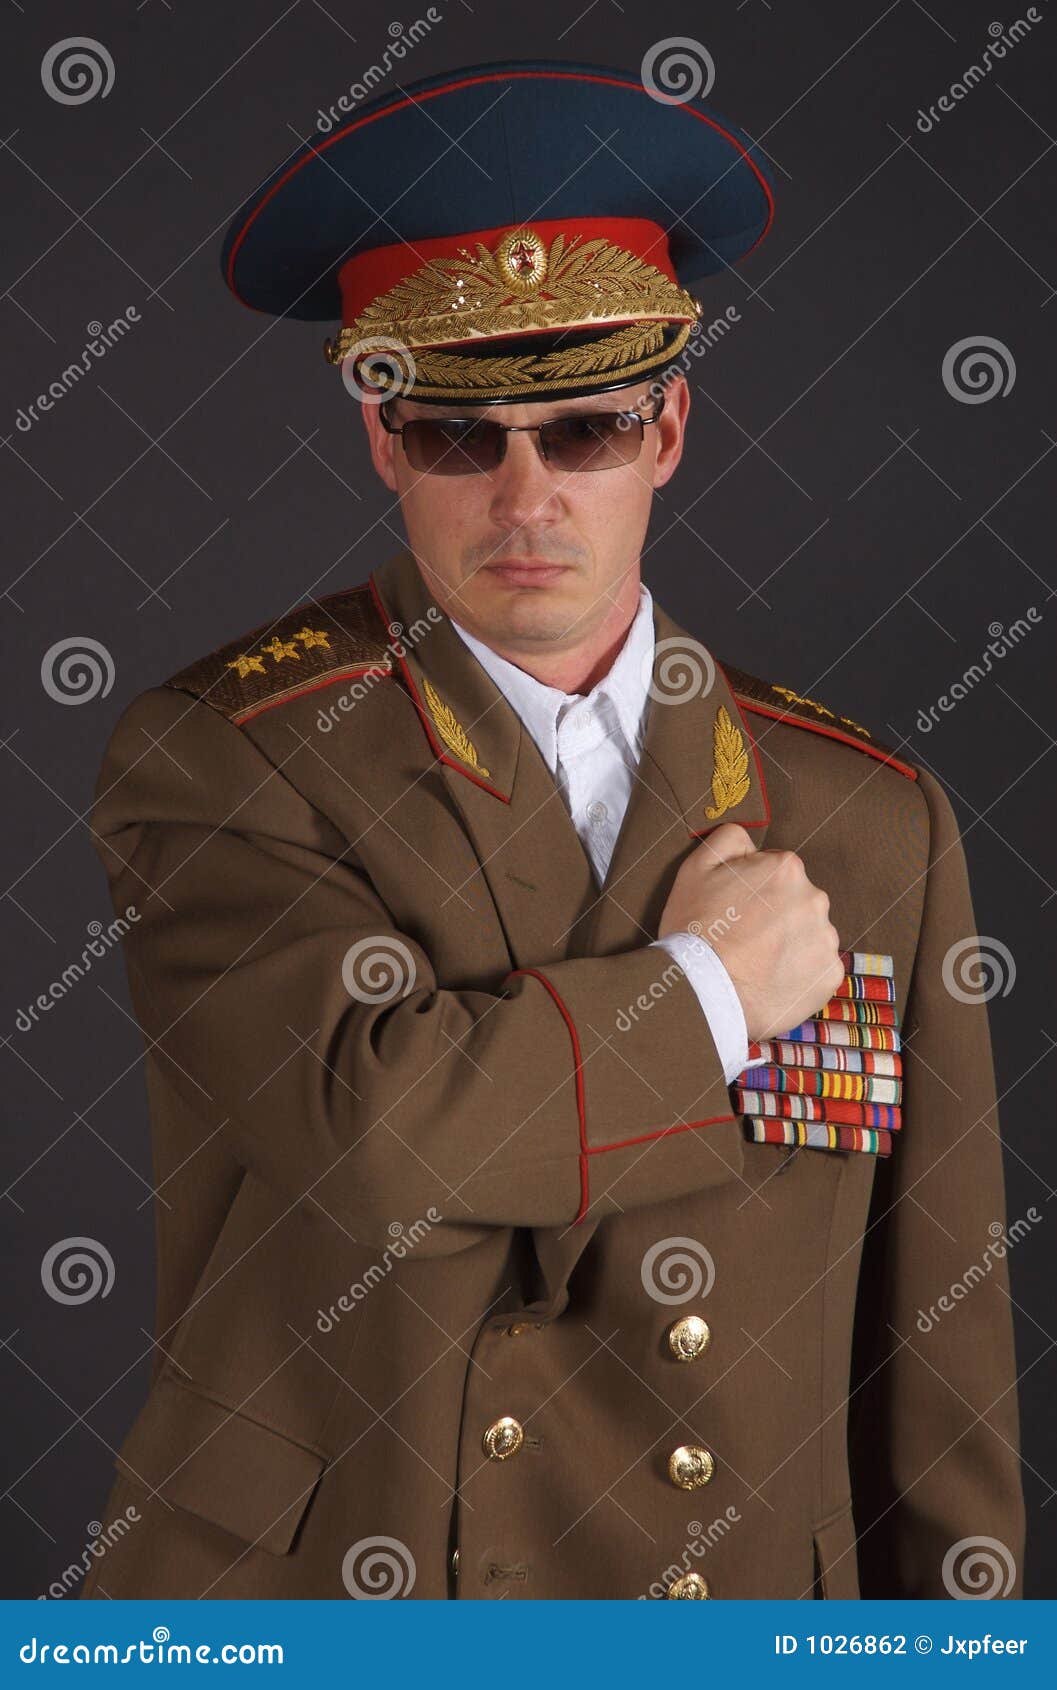 Army Potrait stock photo. Image of foreign, rank, officer - 1026862